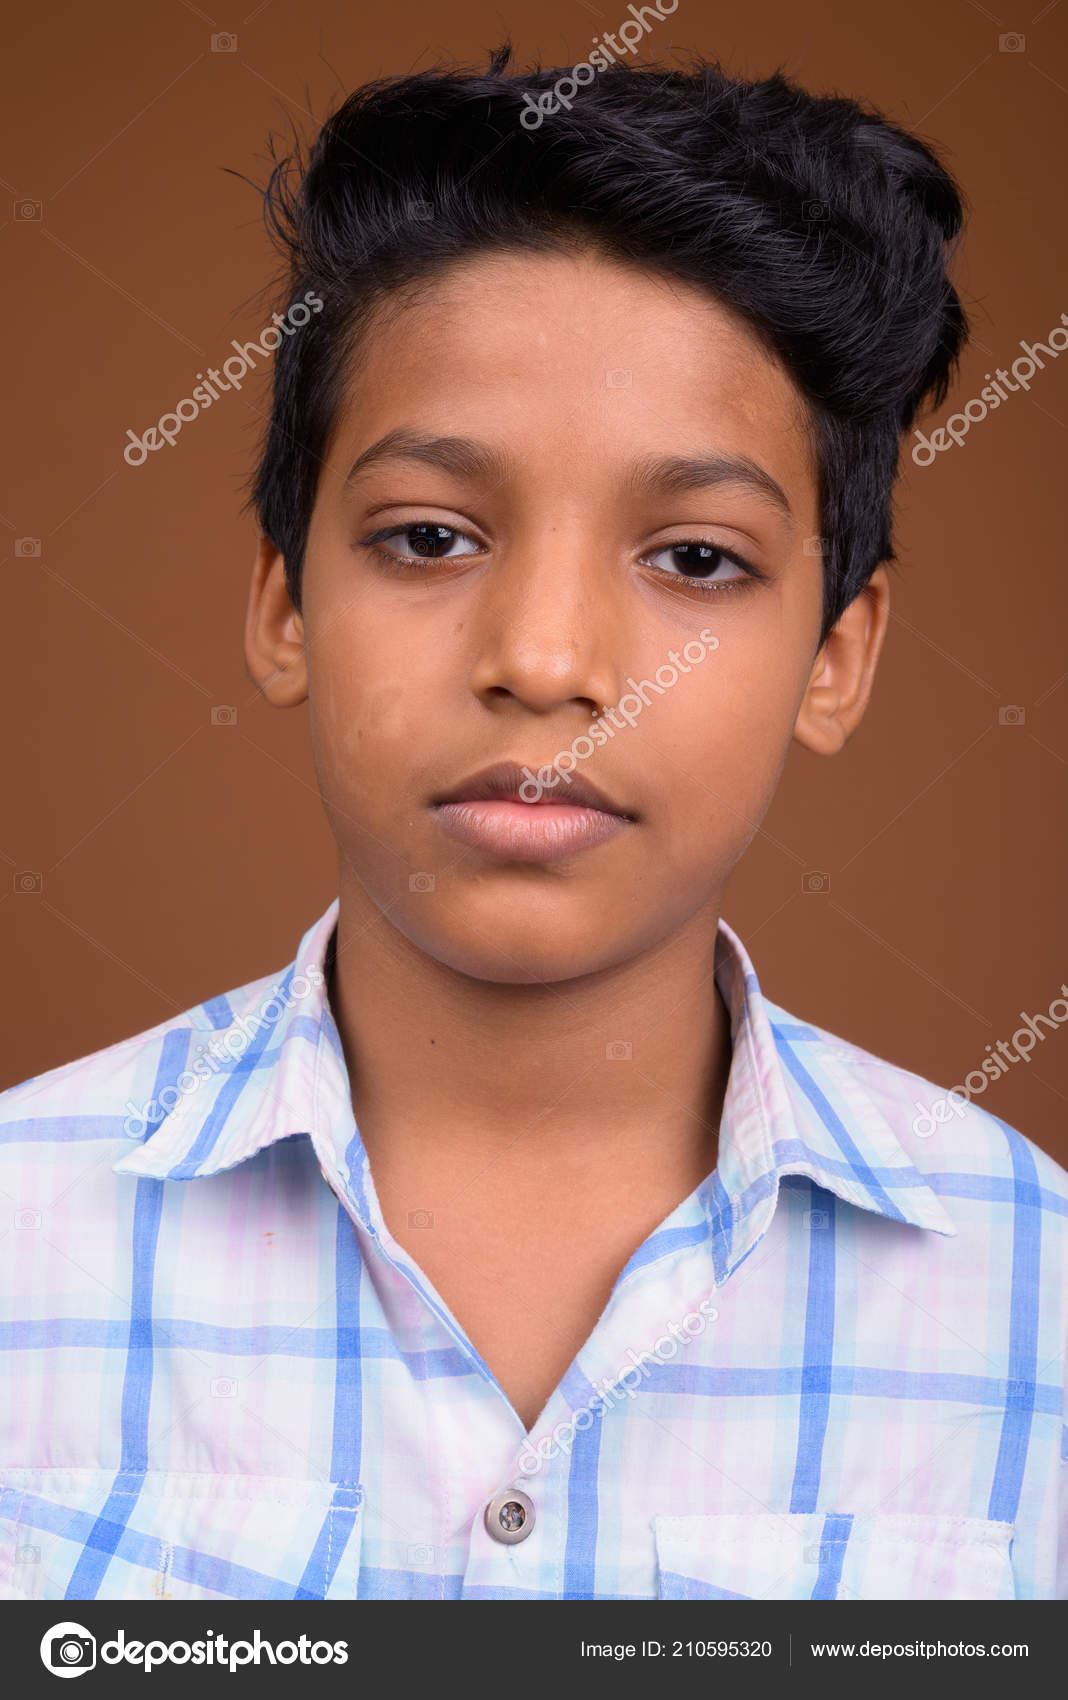 PONDICHERY, PUDUCHERRY, TAMIL NADU, INDIA - SEPTEMBER Circa, 2018. An  Unidentified Poor Indian Boy With A Smiling And Serious Eyes Looks In The  Camera Stock Photo, Picture and Royalty Free Image. Image 120103739.